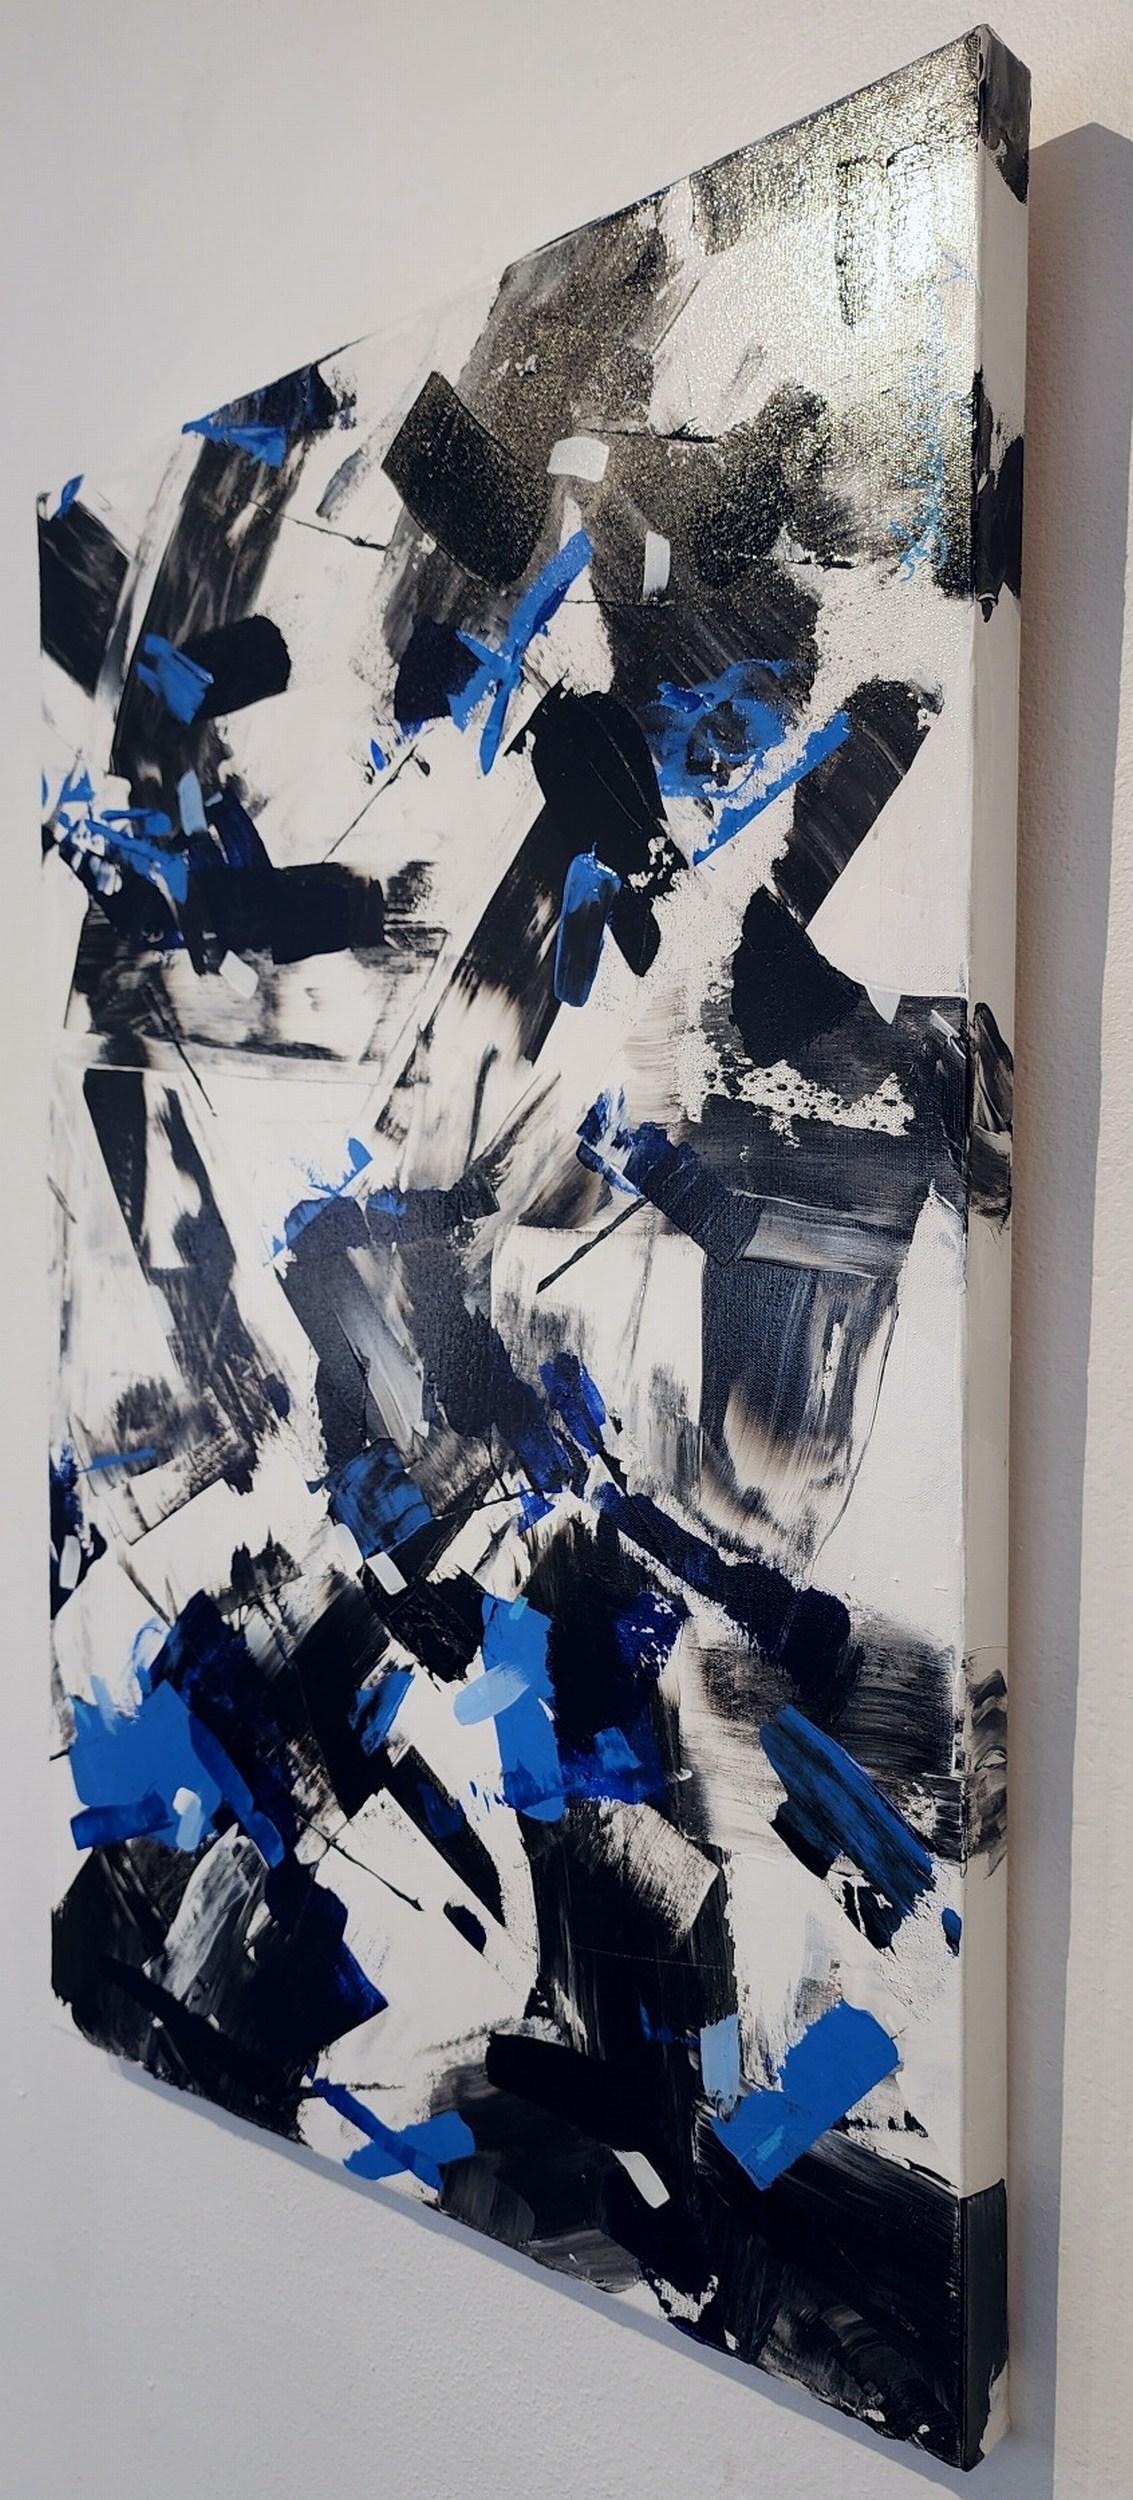 Untitled (Abstract, Black, White, Blue, Gestural) - Painting by Kimberly Marney